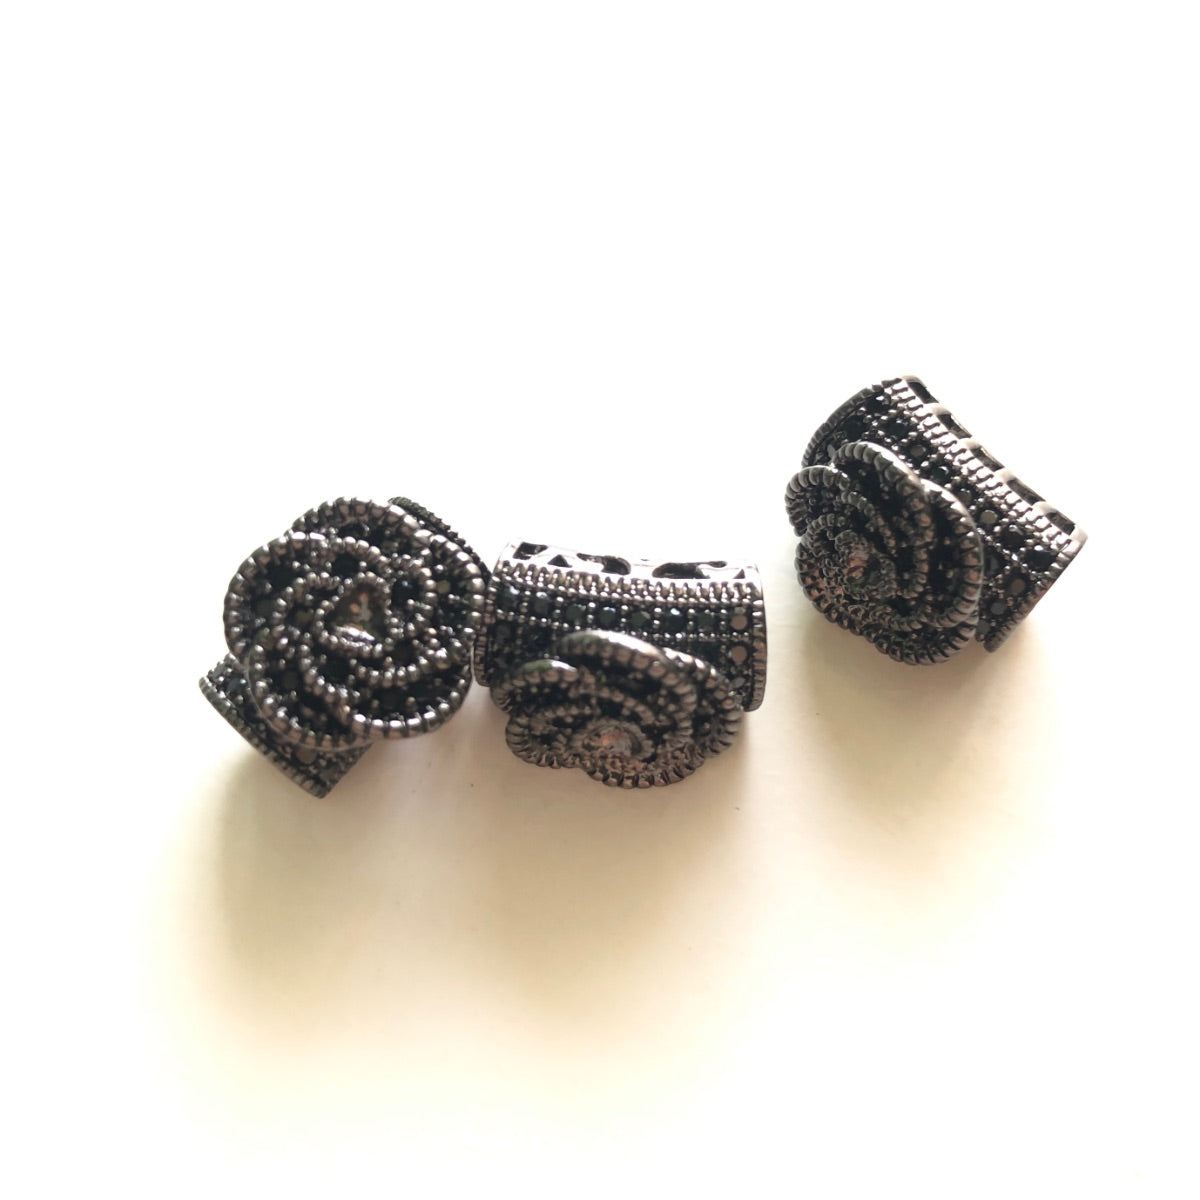 10pcs/lot 14*11mm CZ Paved Flower Tube Spacers Black on Black CZ Paved Spacers Flower Spacers Tube Bar Centerpieces Charms Beads Beyond